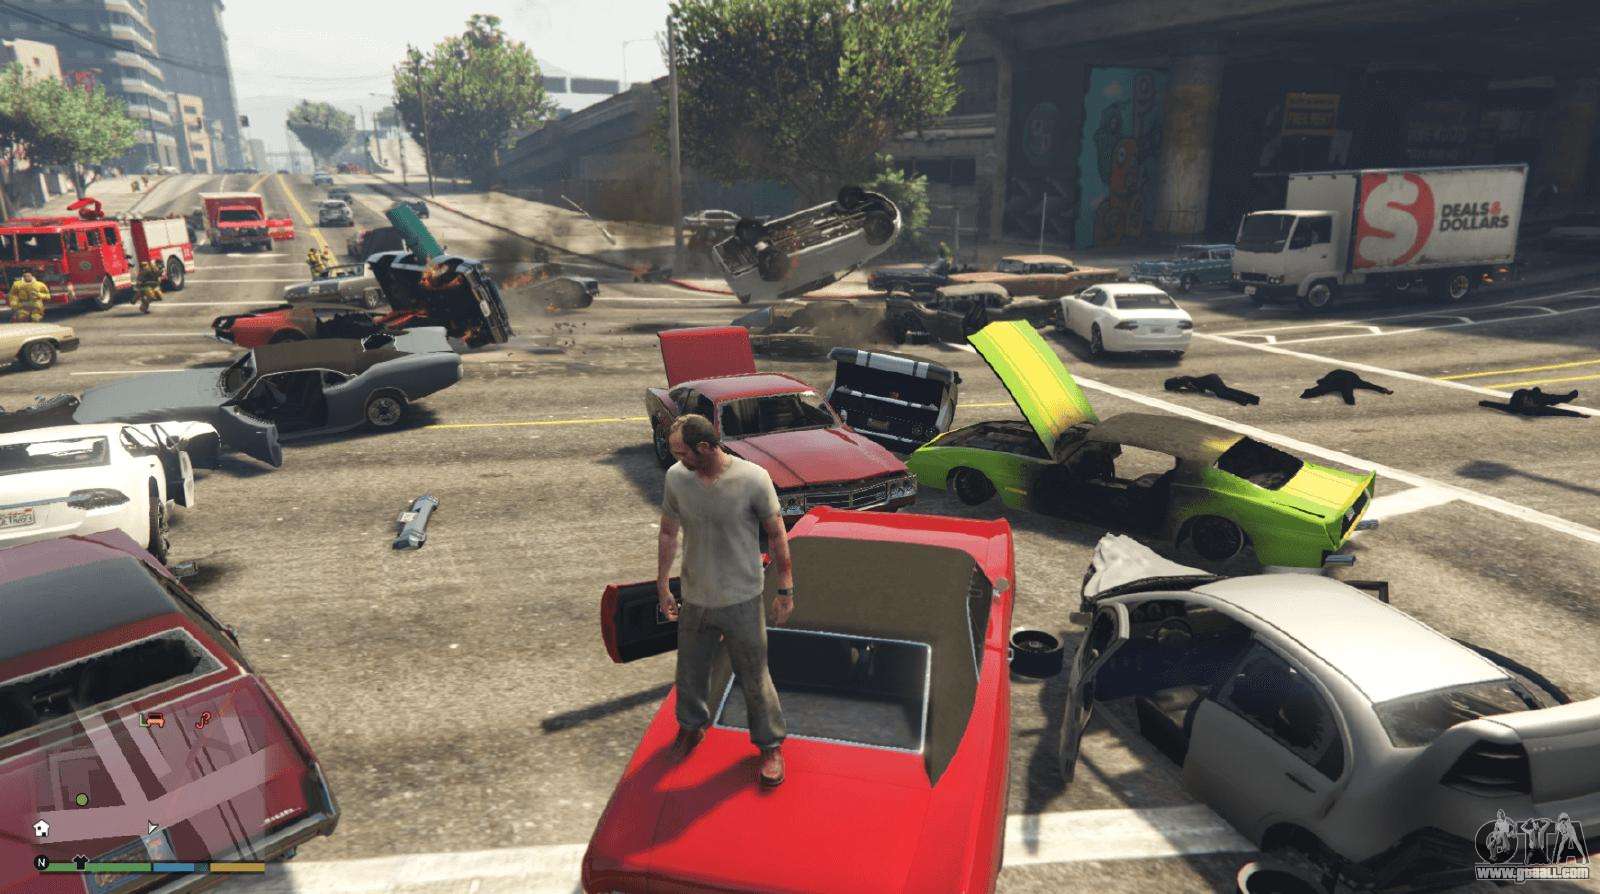 Gta 5 Mods Download And Install Mods In Gta 5 Is Very Simple